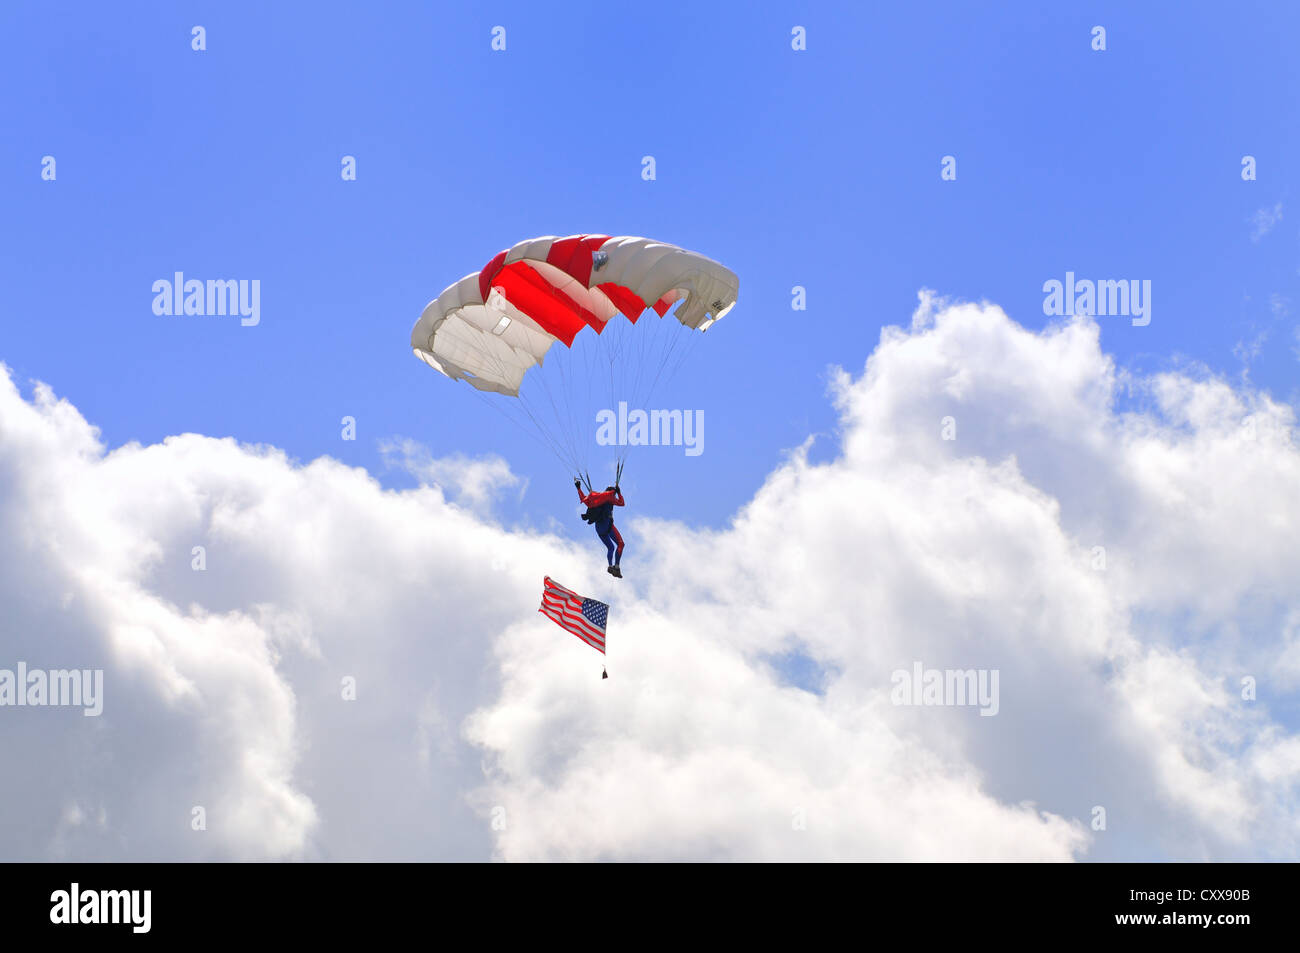 Skydiver with the USA flag. Stock Photo